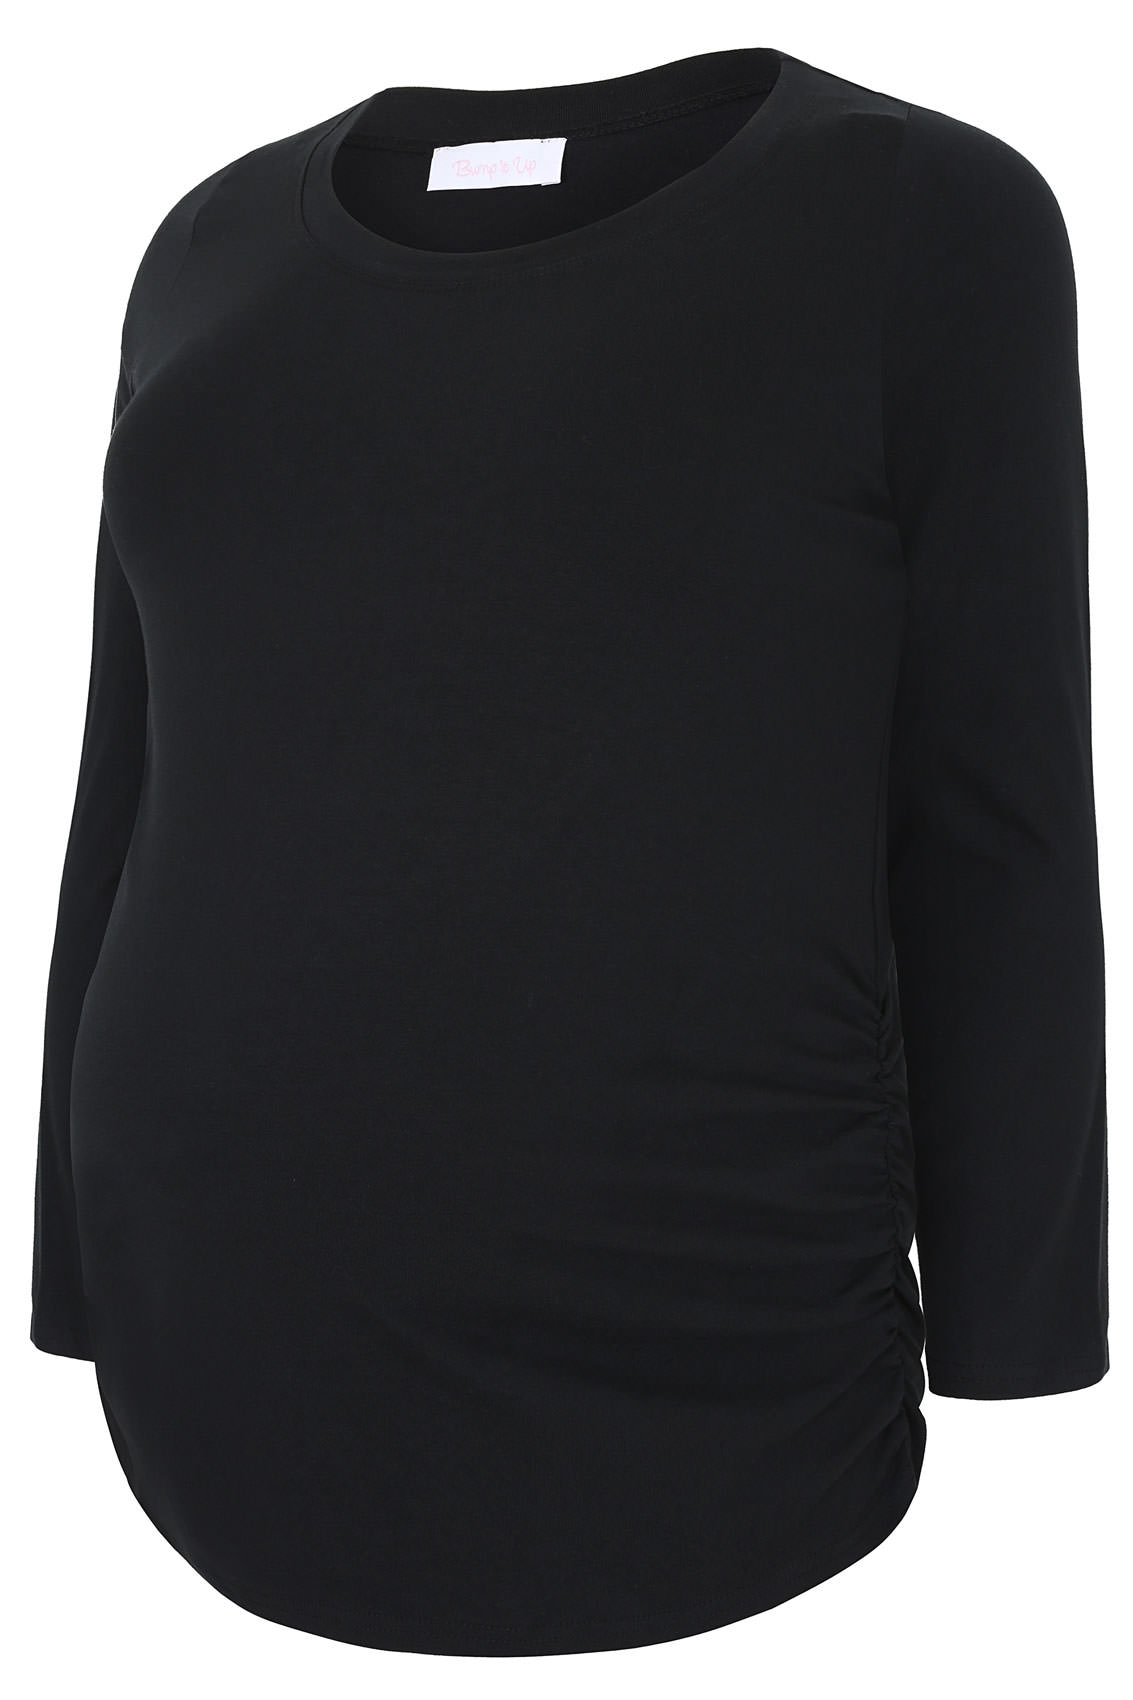 BUMP IT UP MATERNITY Black Cotton Long Sleeved Top Plus 